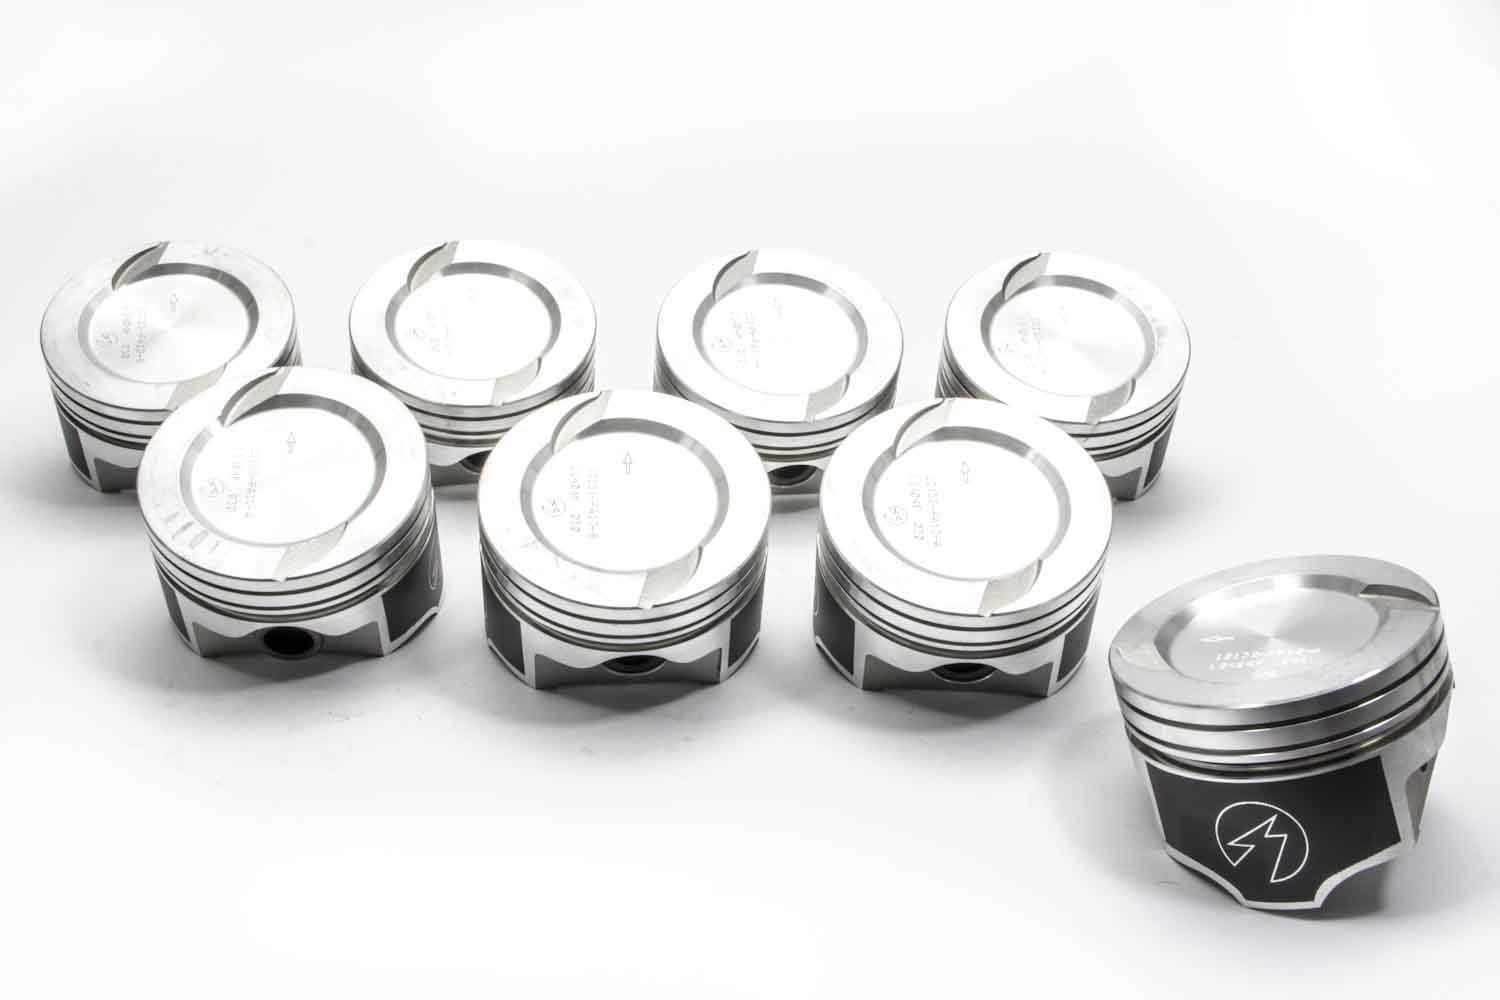 Sealed Power L2404F30 Piston, Speed Pro, Forged, 4.390 in Bore, 5/64 x 5/64 x 3/16 in Ring Grooves, Minus 22.00 cc, Coated Skirt, Big Block Ford, Set of 8